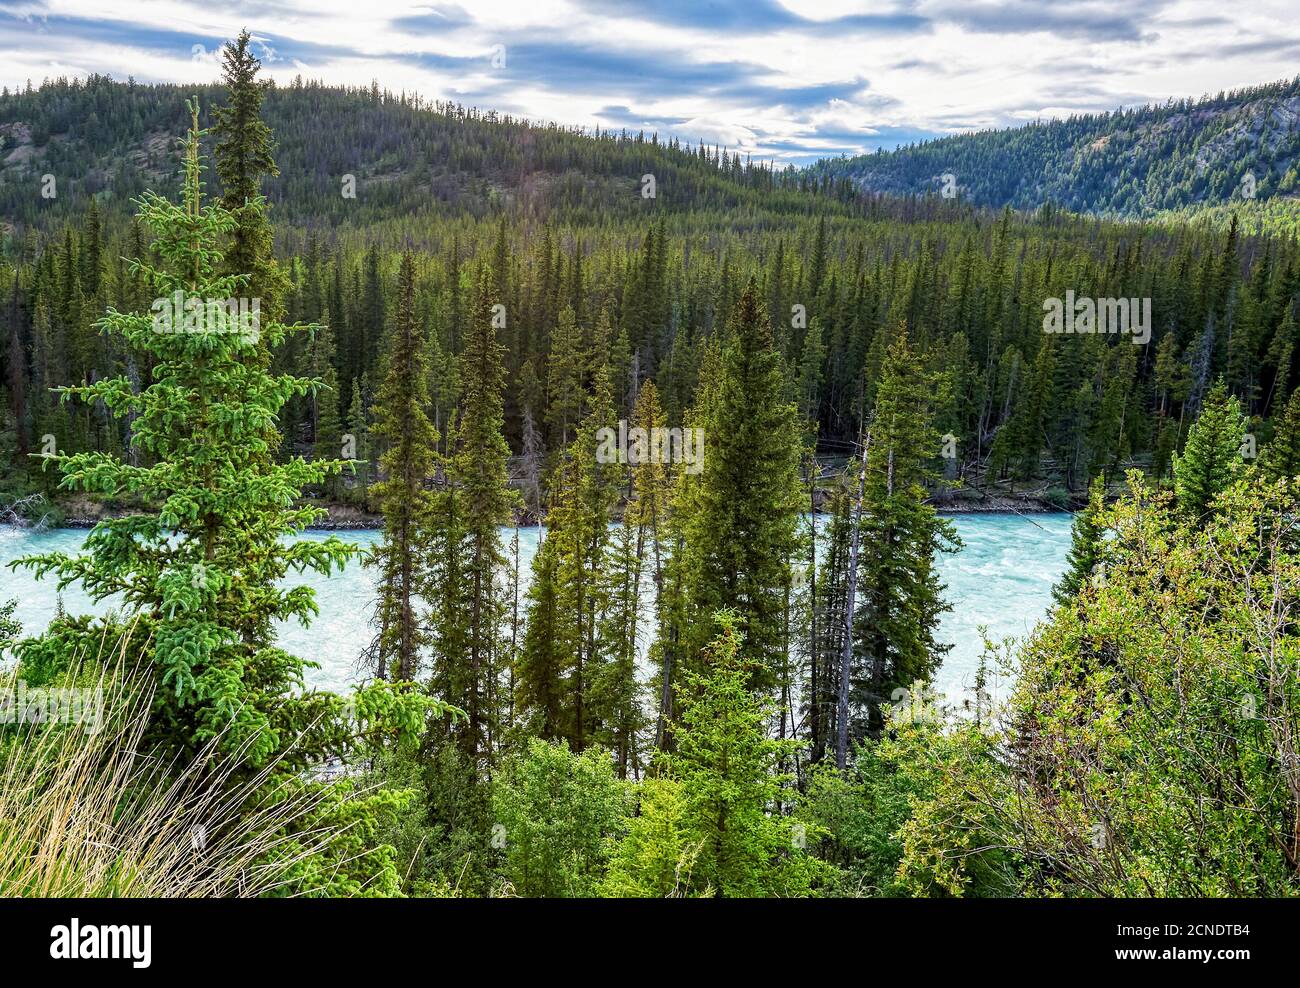 Scenic panoramic view of the Chilcotin River surrounded by pine tree forest and mountains in the background with a cloudy sky, British Columbia Stock Photo